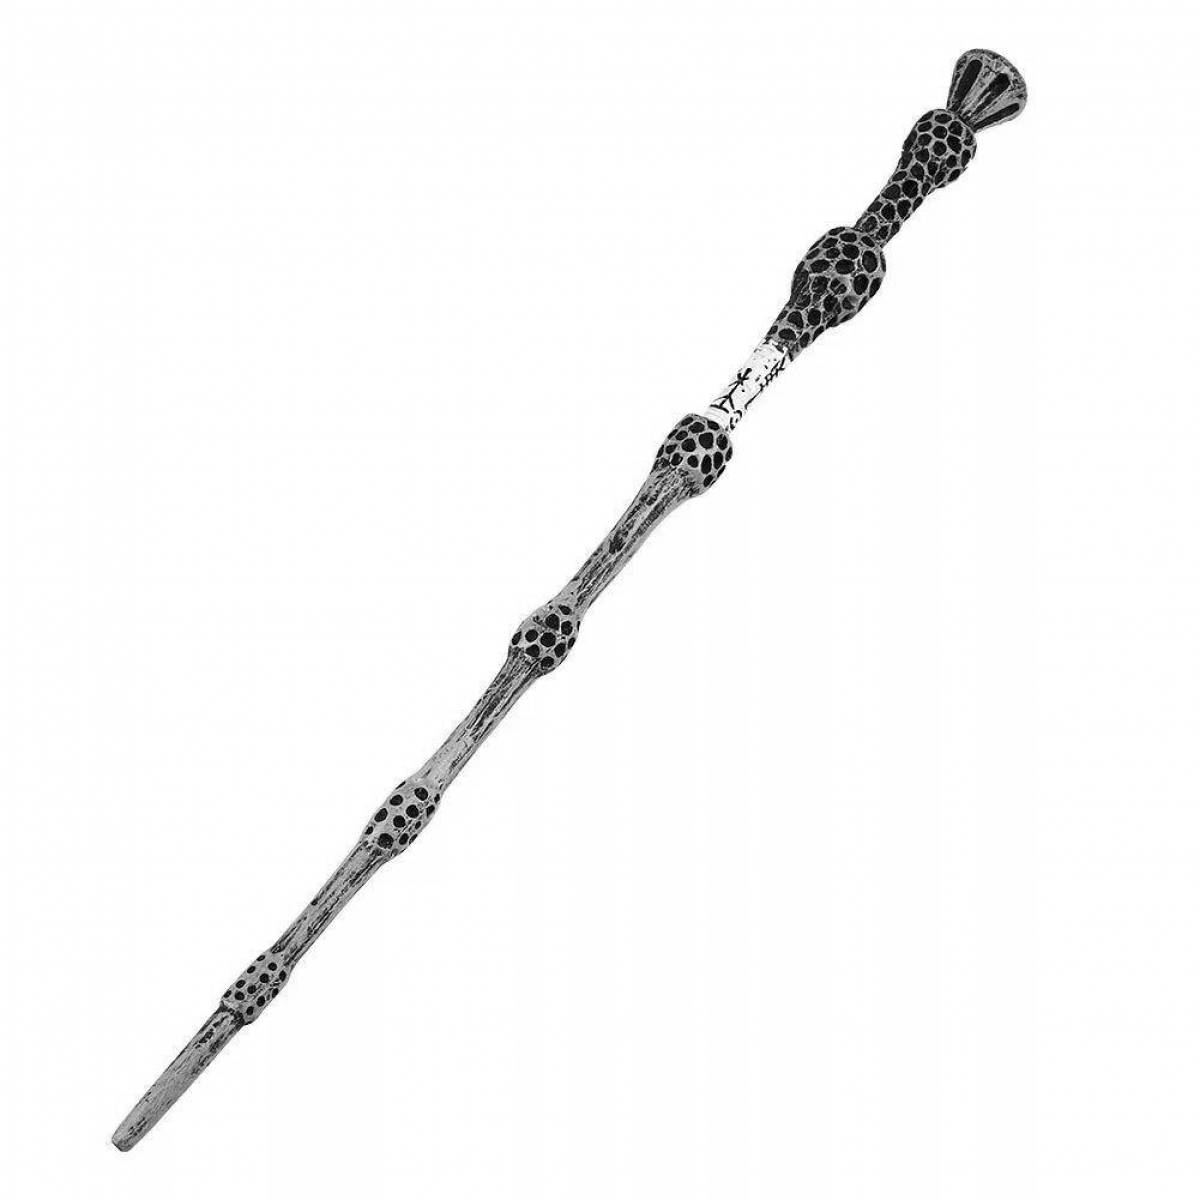 Major coloring harry potter wand